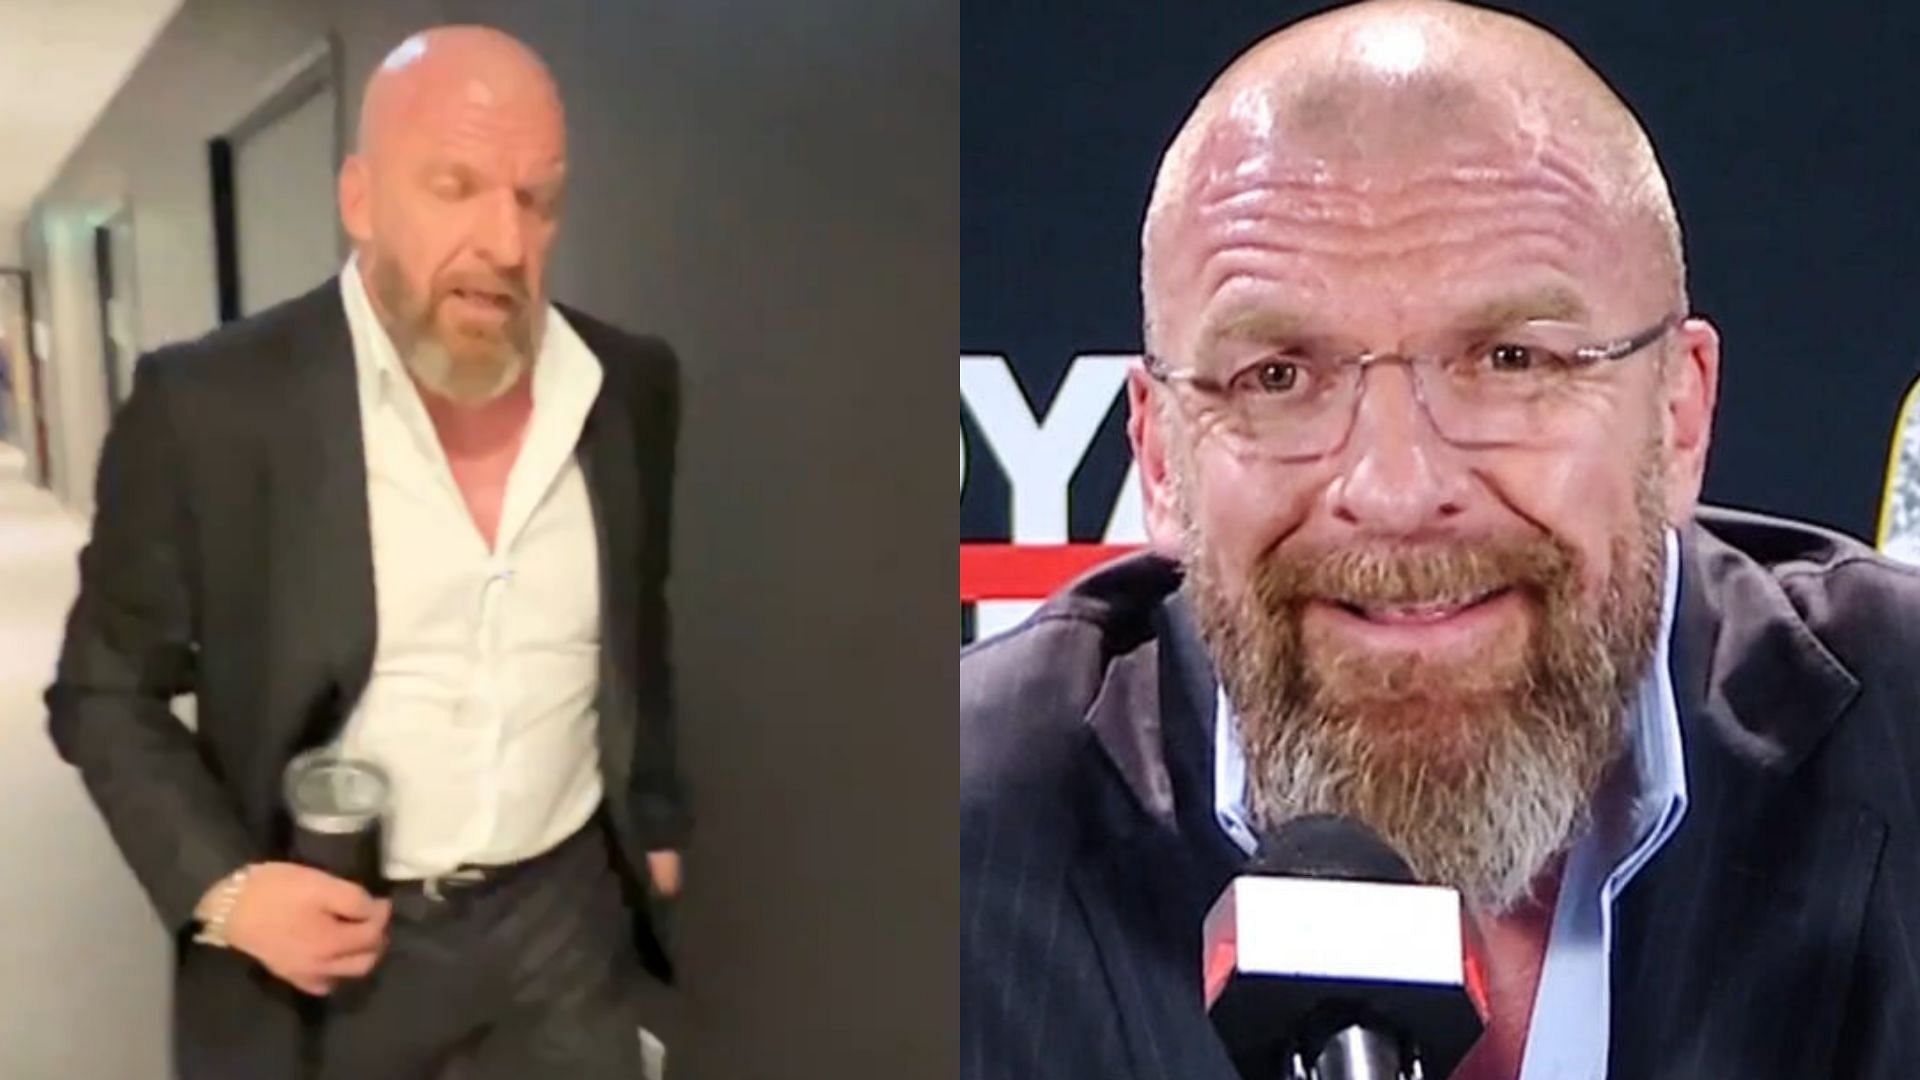 Triple H had some words to share after WWE Backlash